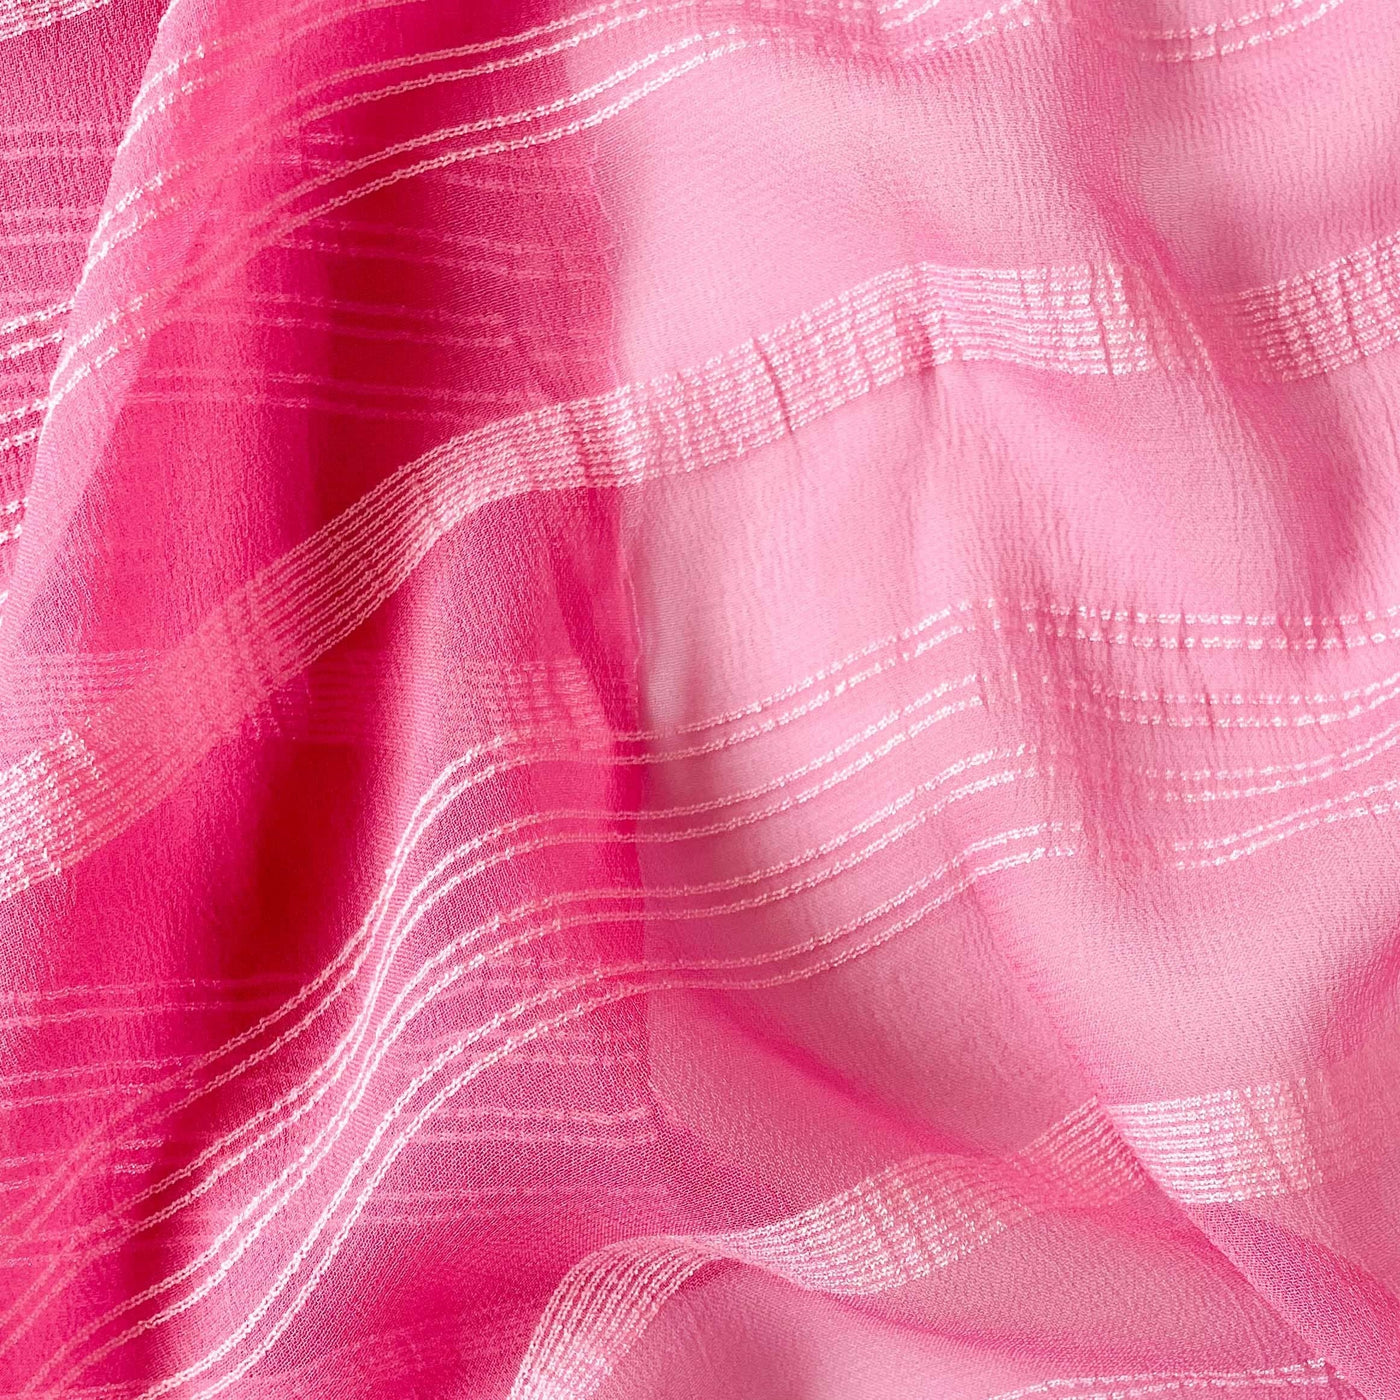 Georgette Saree Cut Piece (CUT PIECE) Baby Pink Multi Stripes Woven Pure Georgette Fabric (Width 44 Inches)